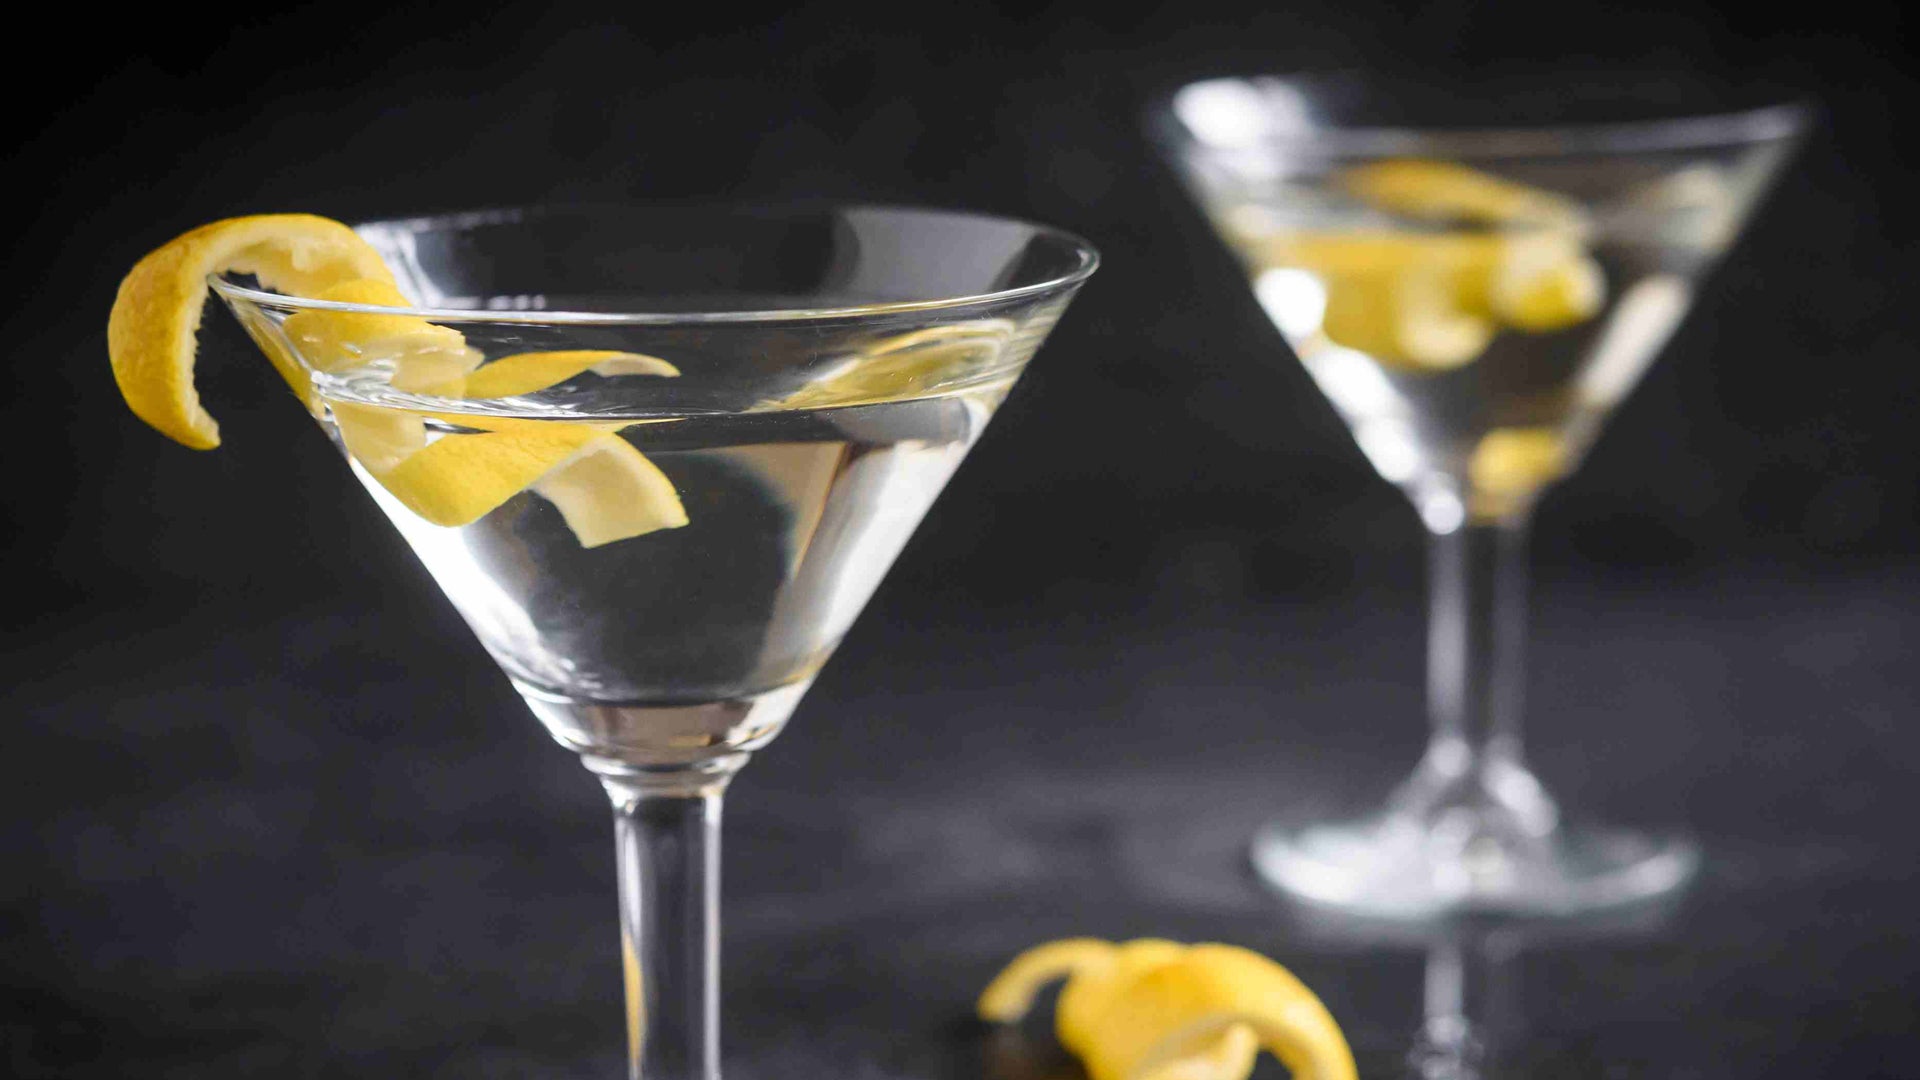 Quench Your Thirst With These Vodka Lemon Delights